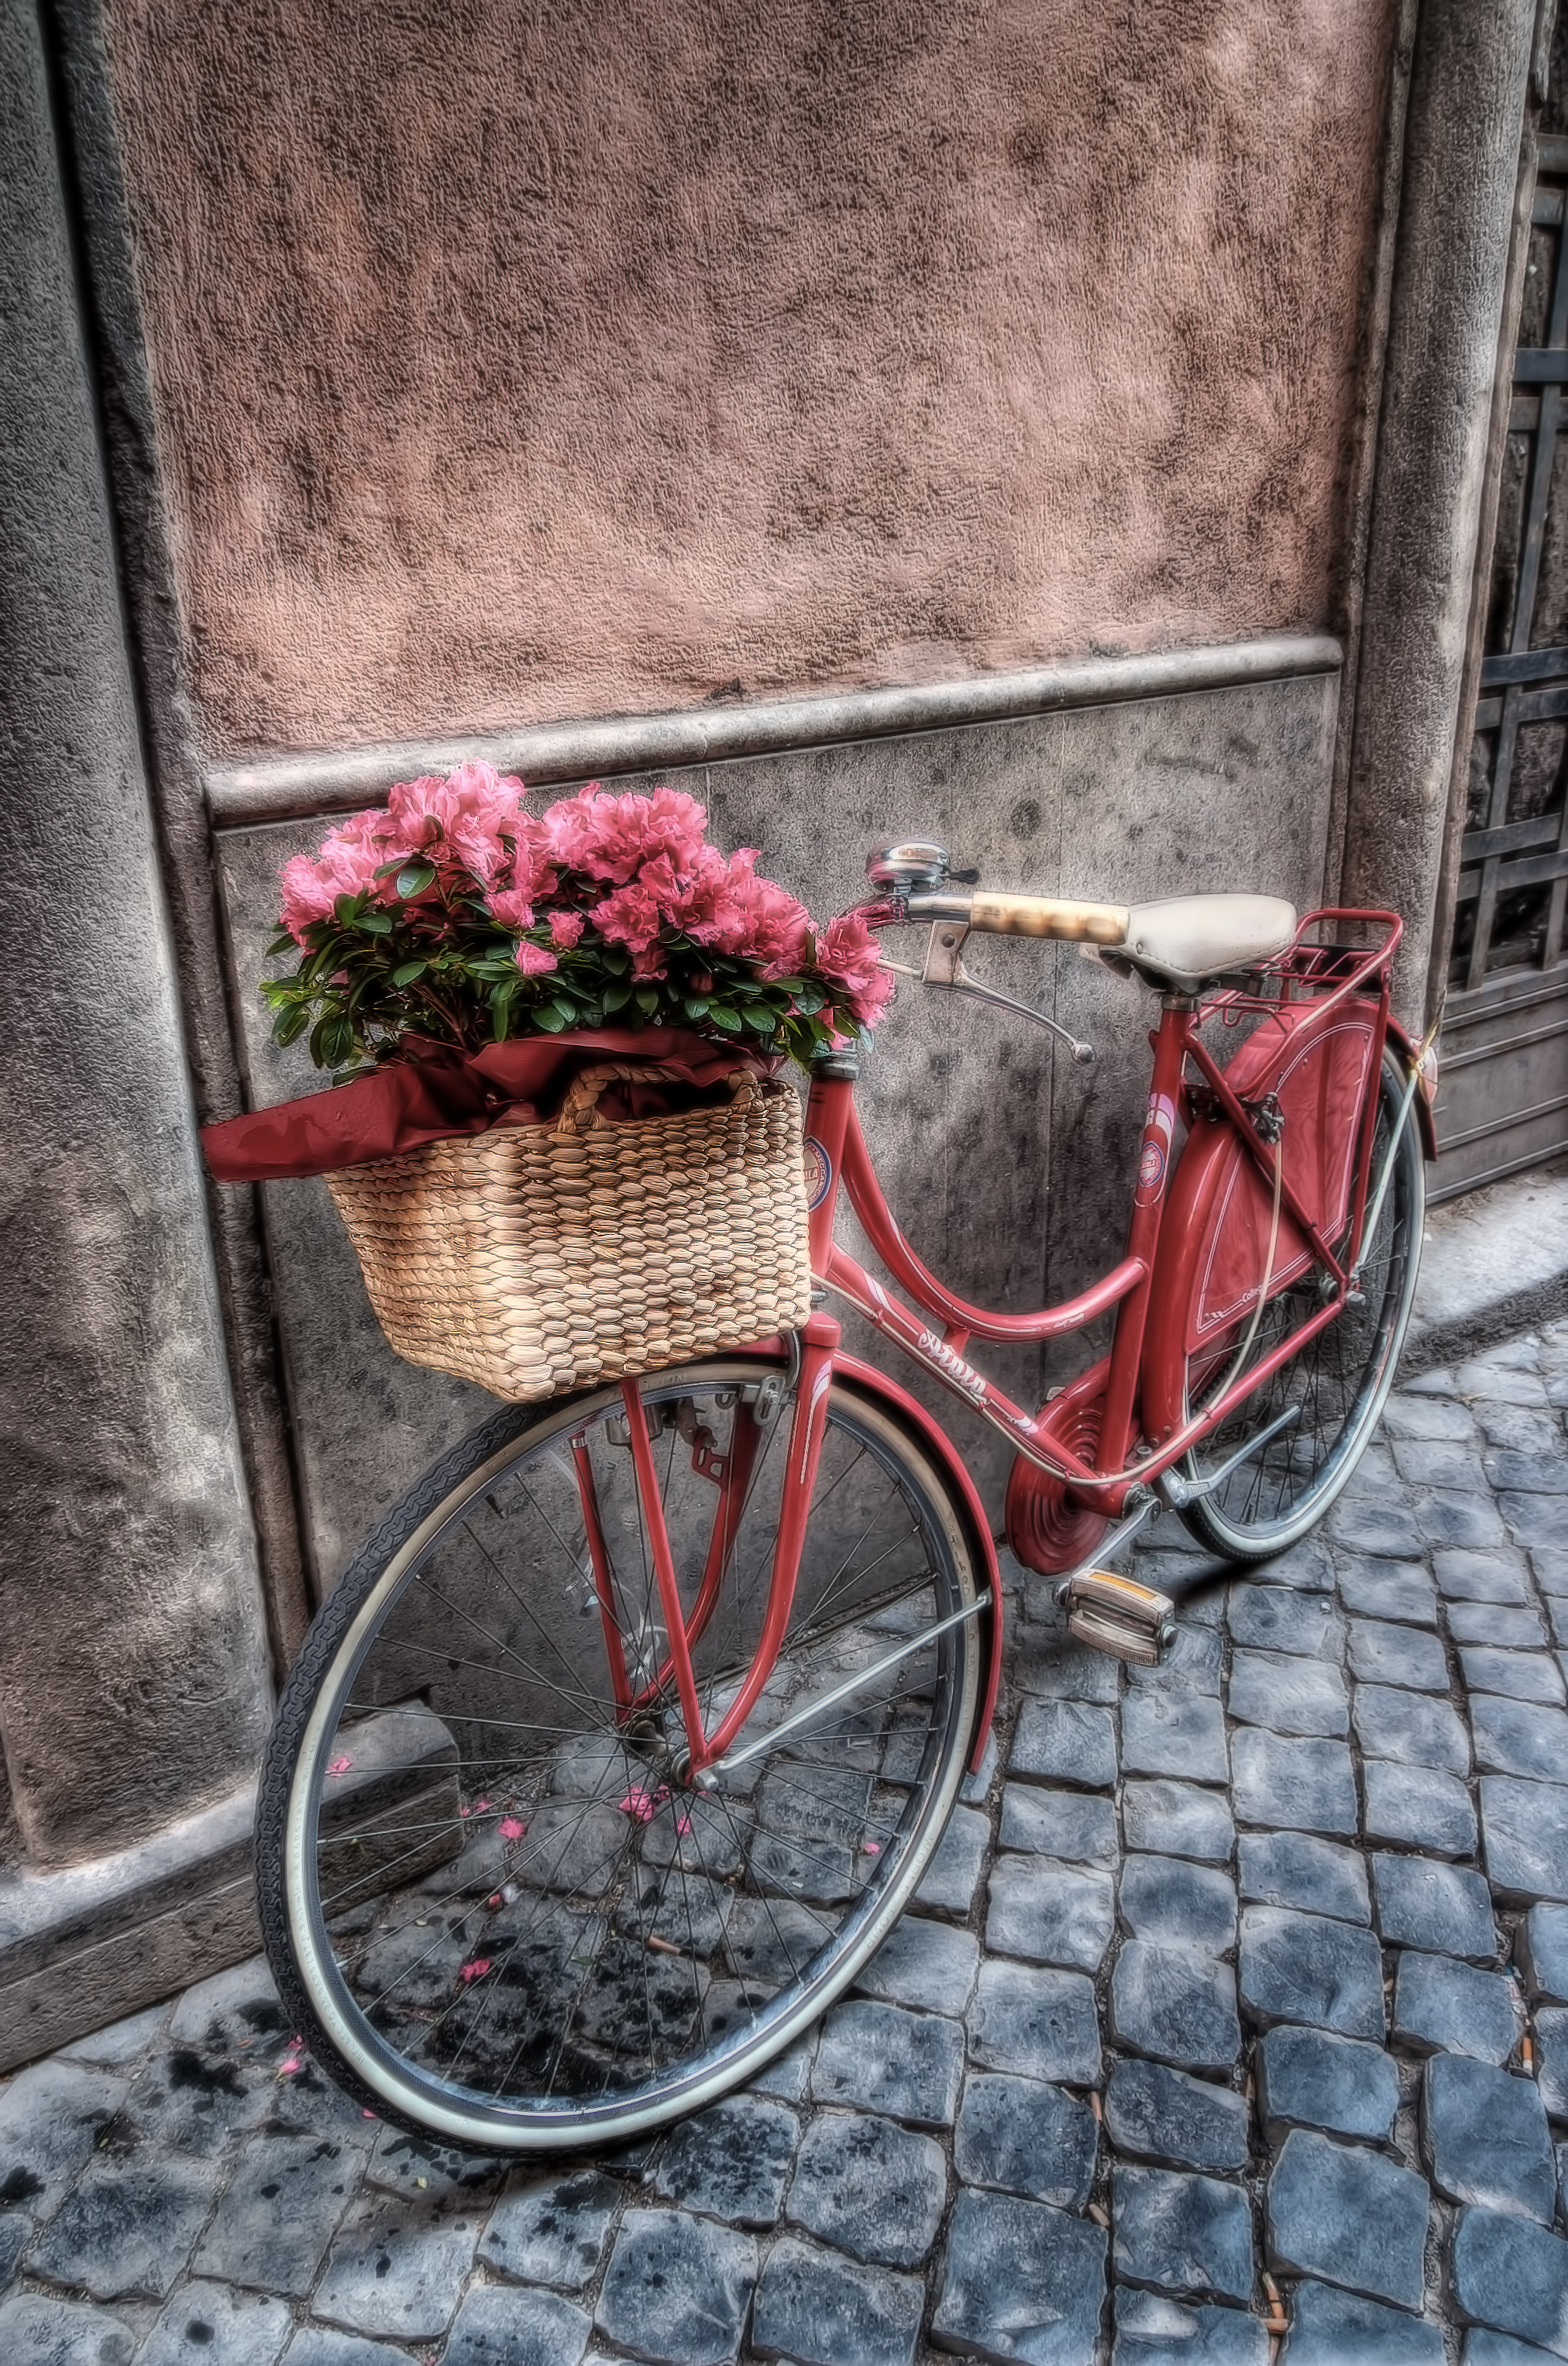 flowers on the bicycle | HDR creme